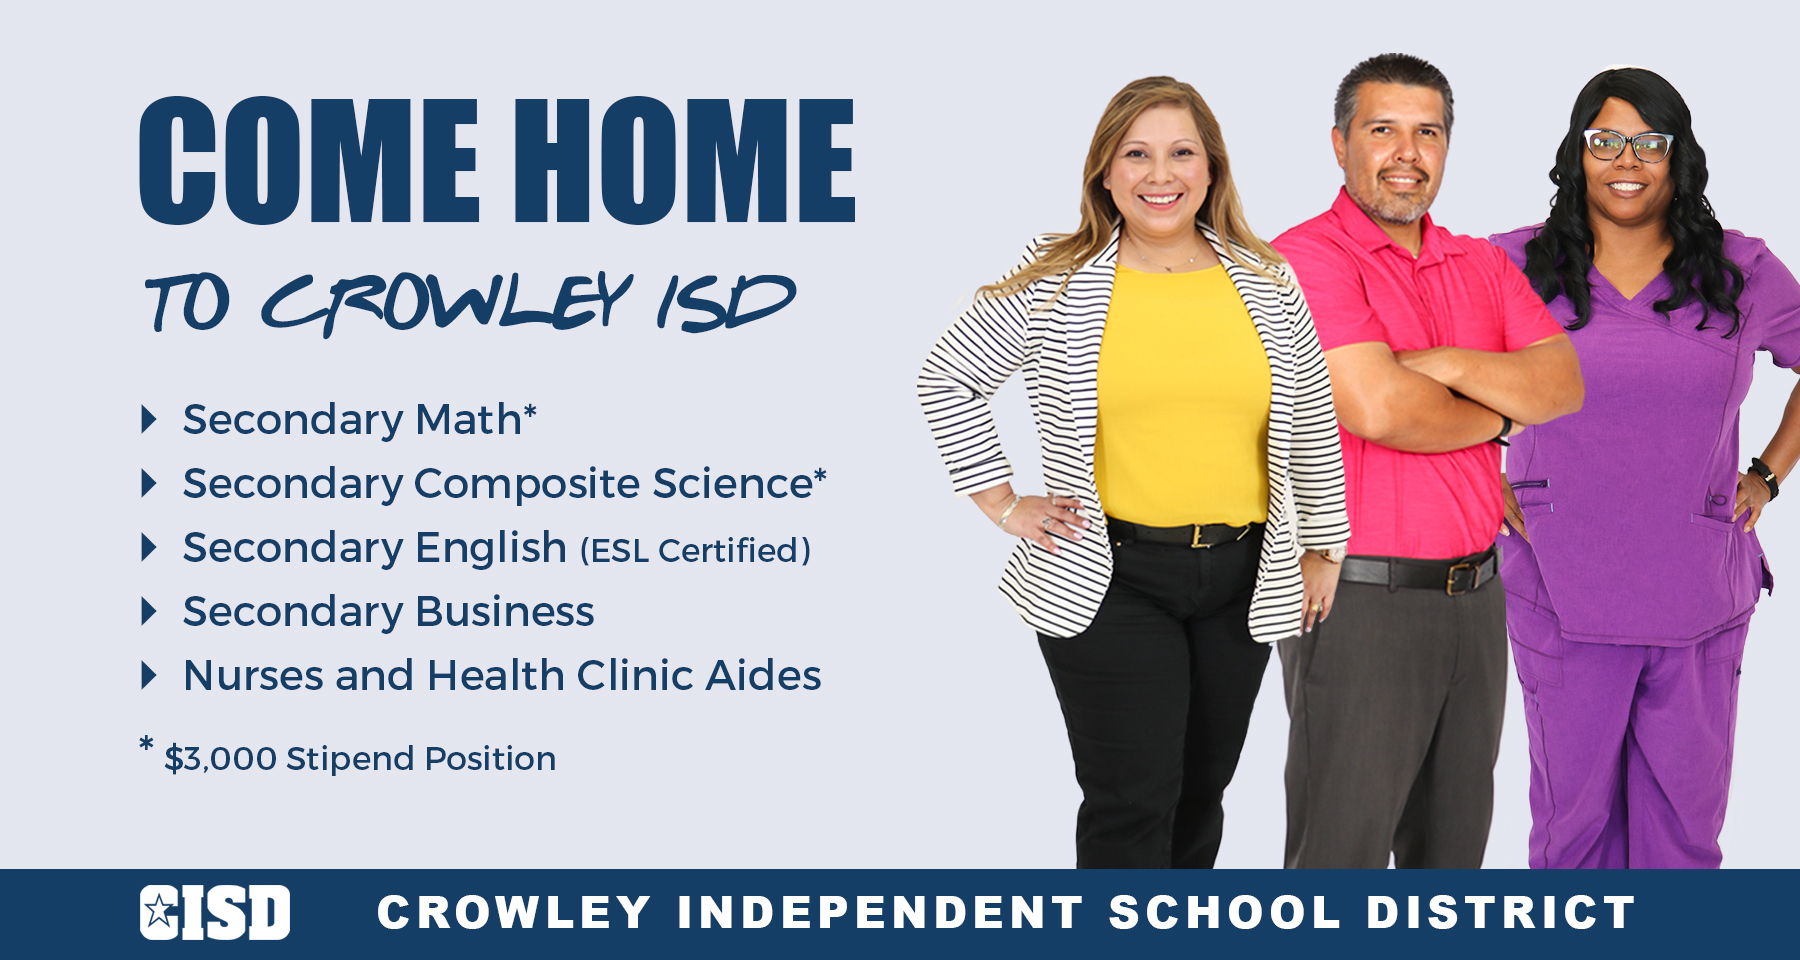 Crowley ISD on Twitter "NOW HIRING Come home to Crowley ISD for the